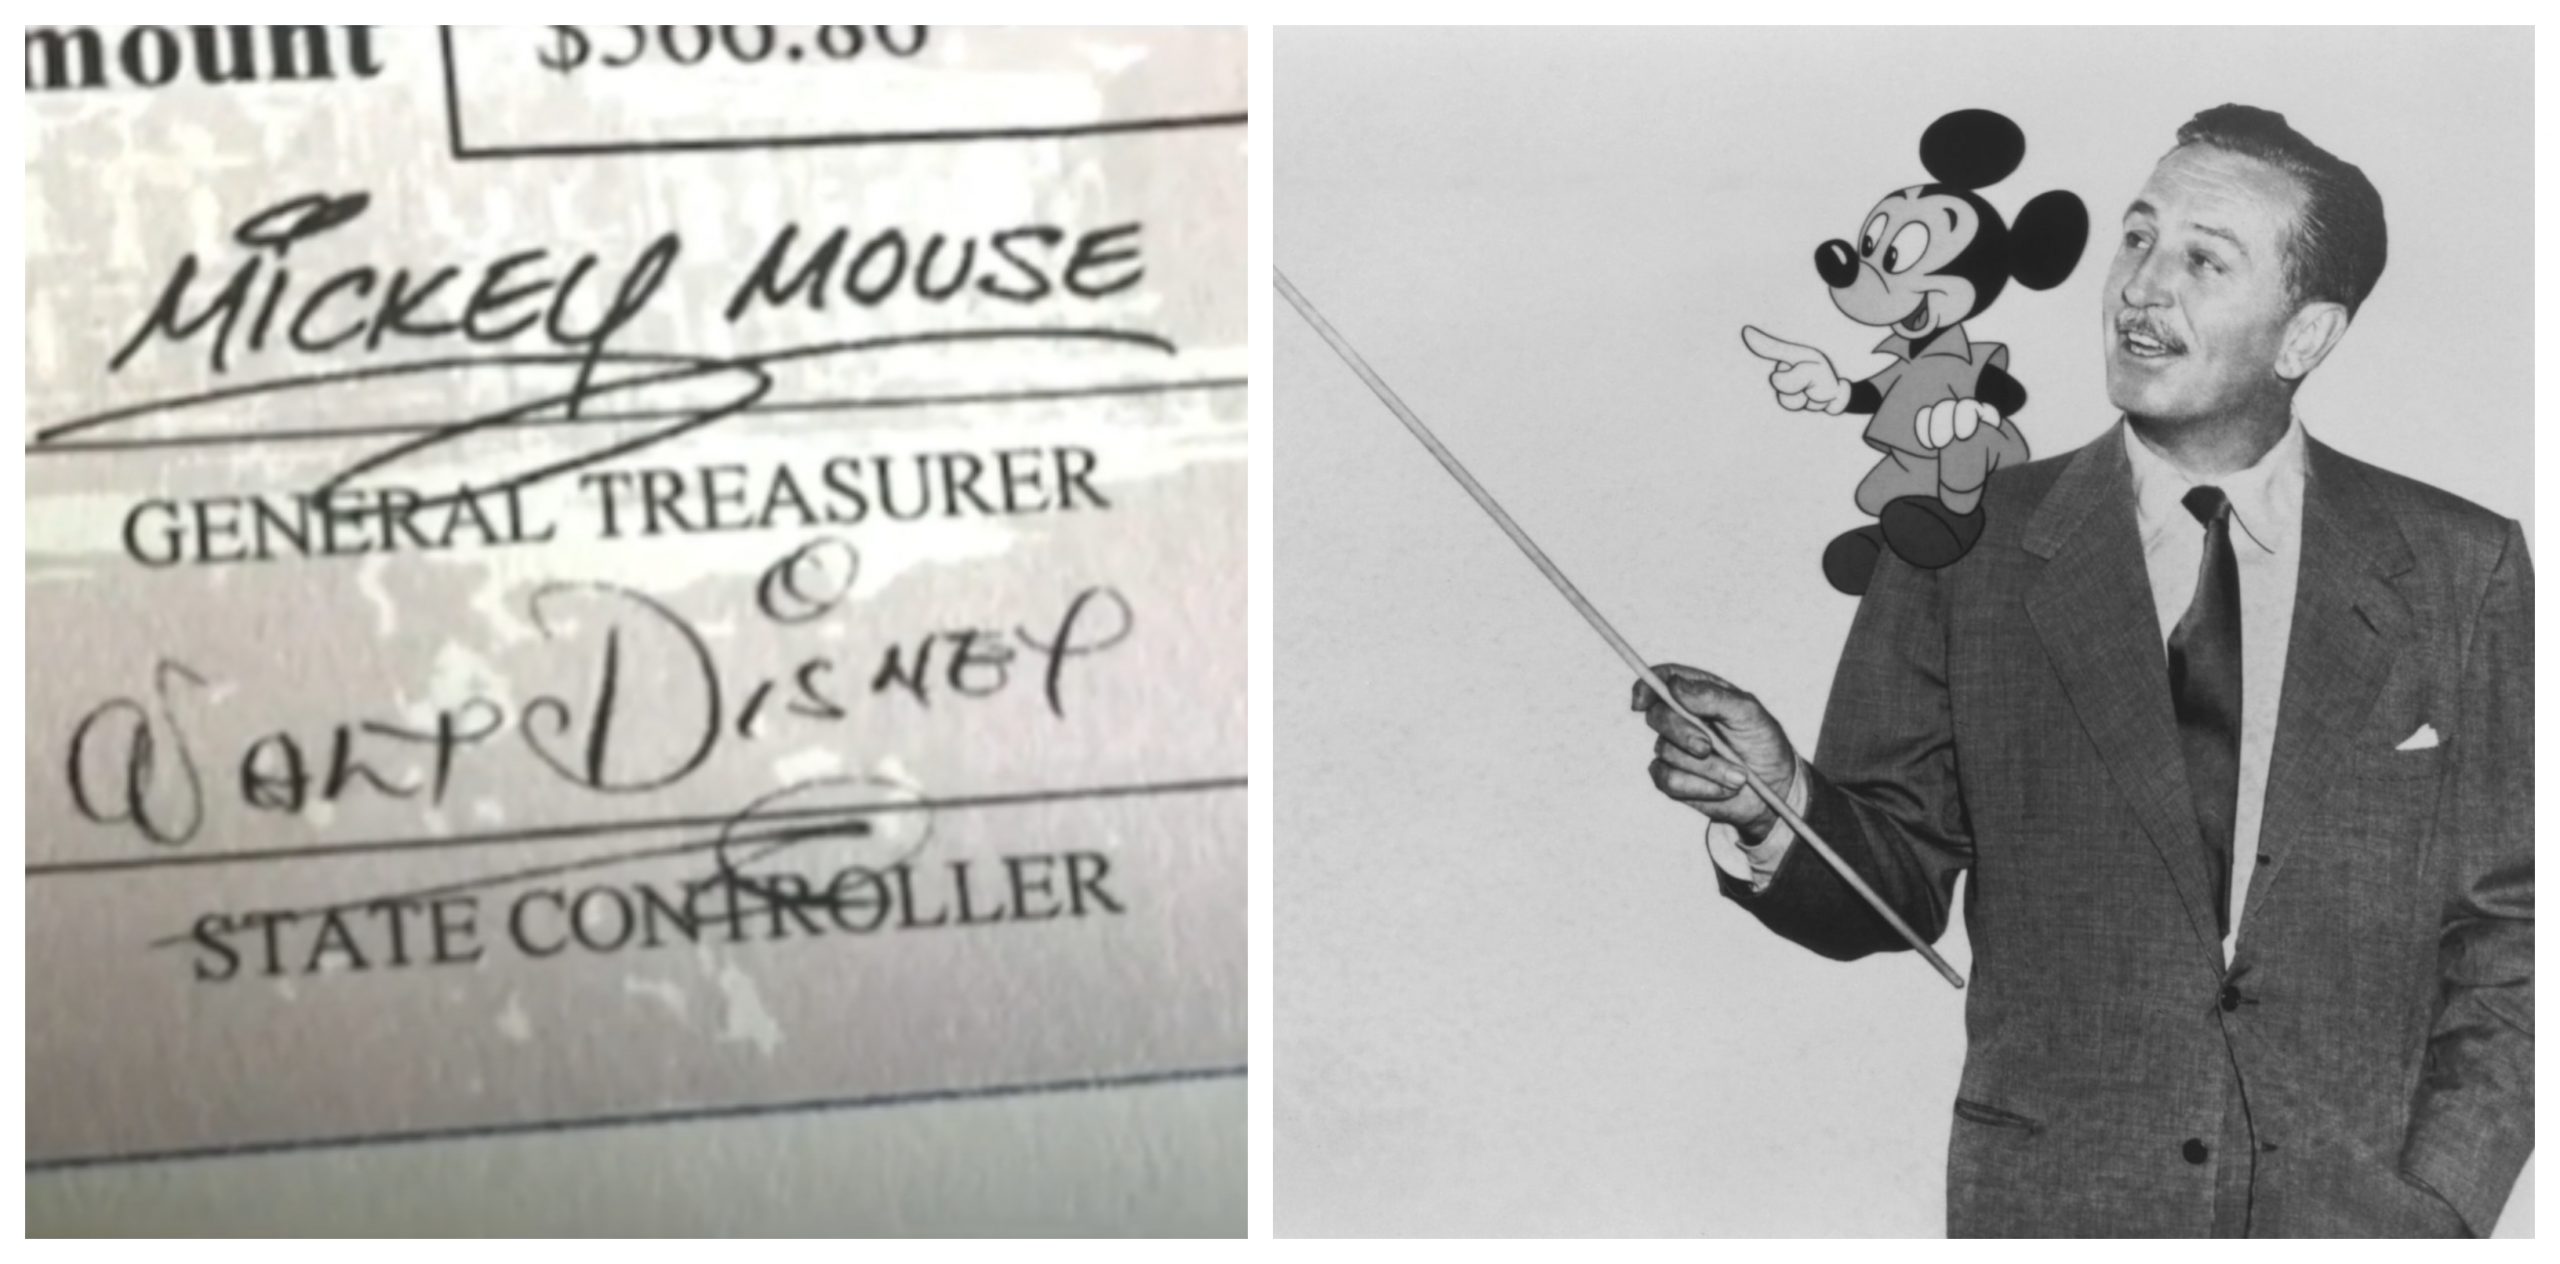 Rhode Island tax officials mistakenly sent refund checks signed by Mickey Mouse and Walt Disney